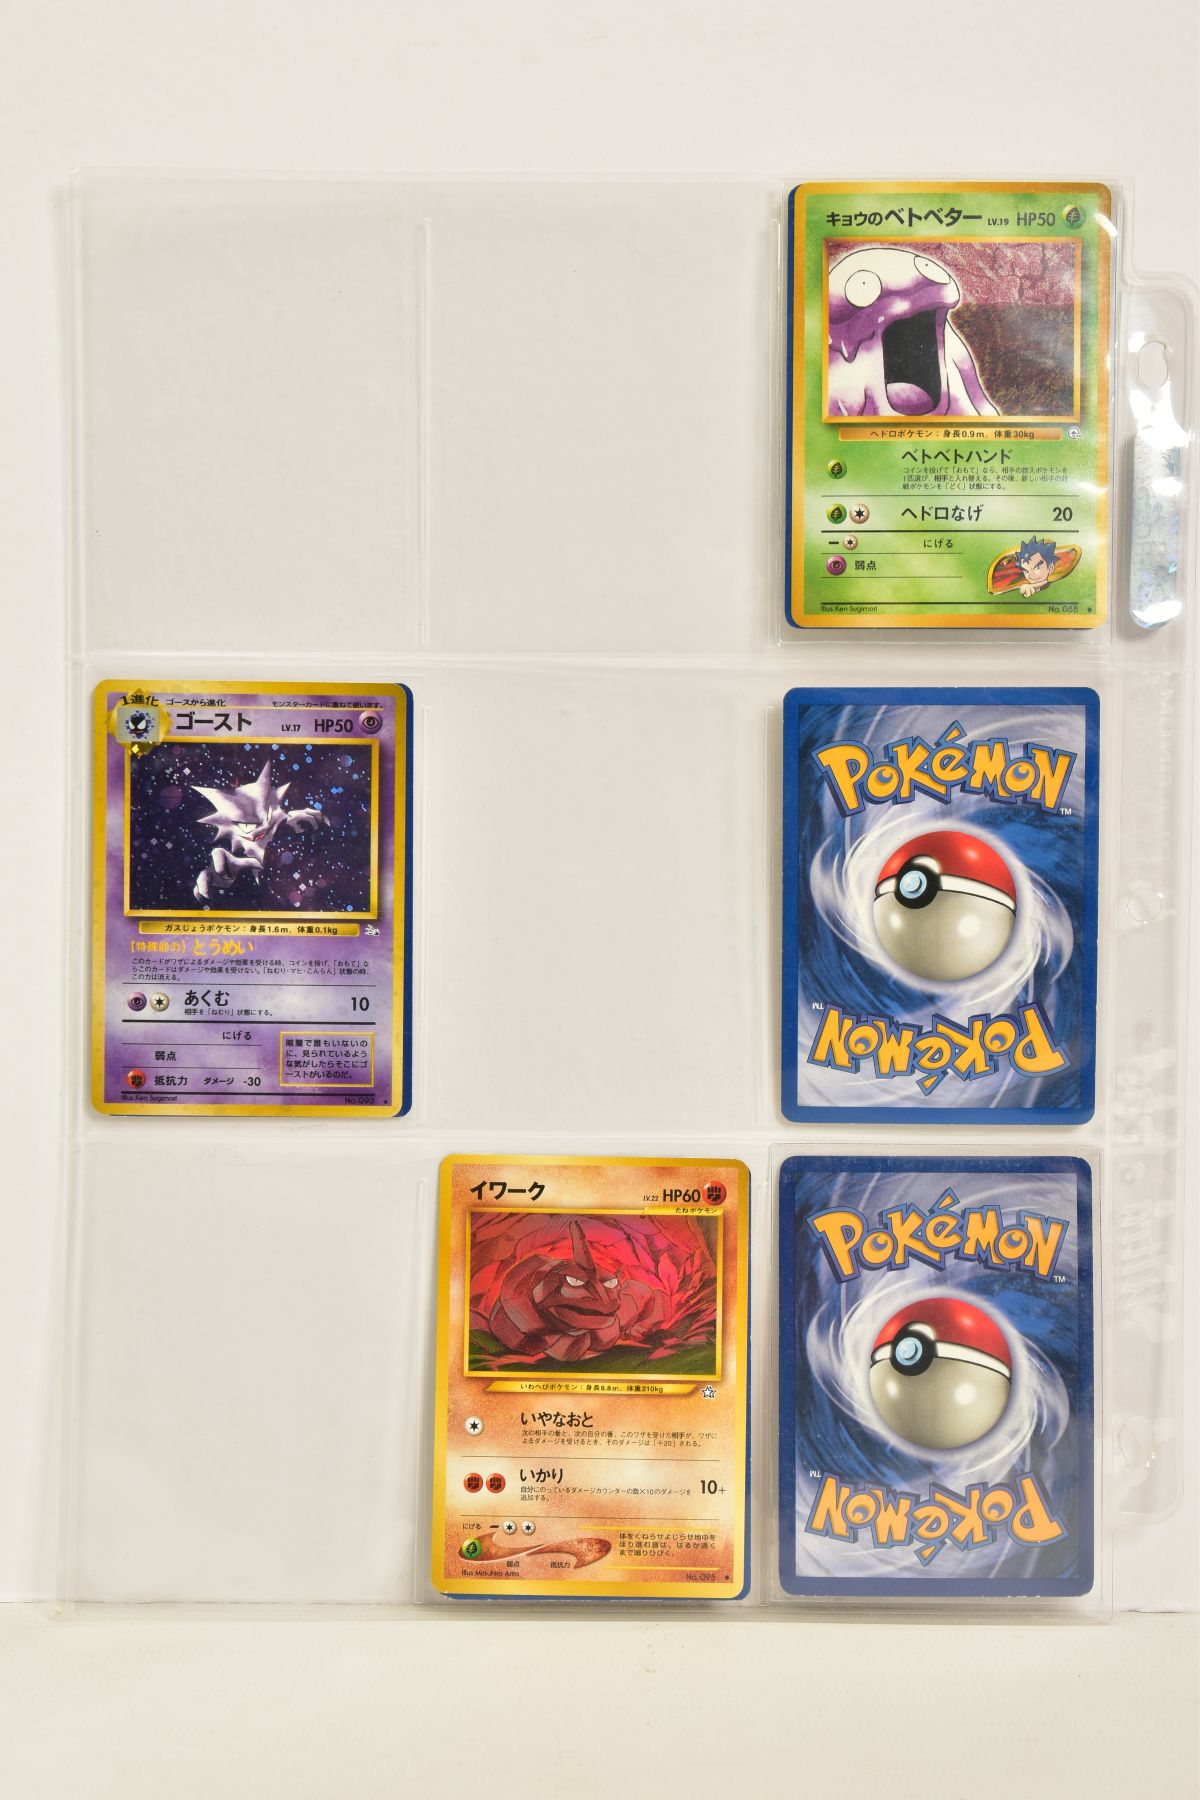 A QUANTITY OF POKEMON TCG CARDS, cards are assorted from Base Set, Base Set 2, Jungle, Fossil, - Image 23 of 46